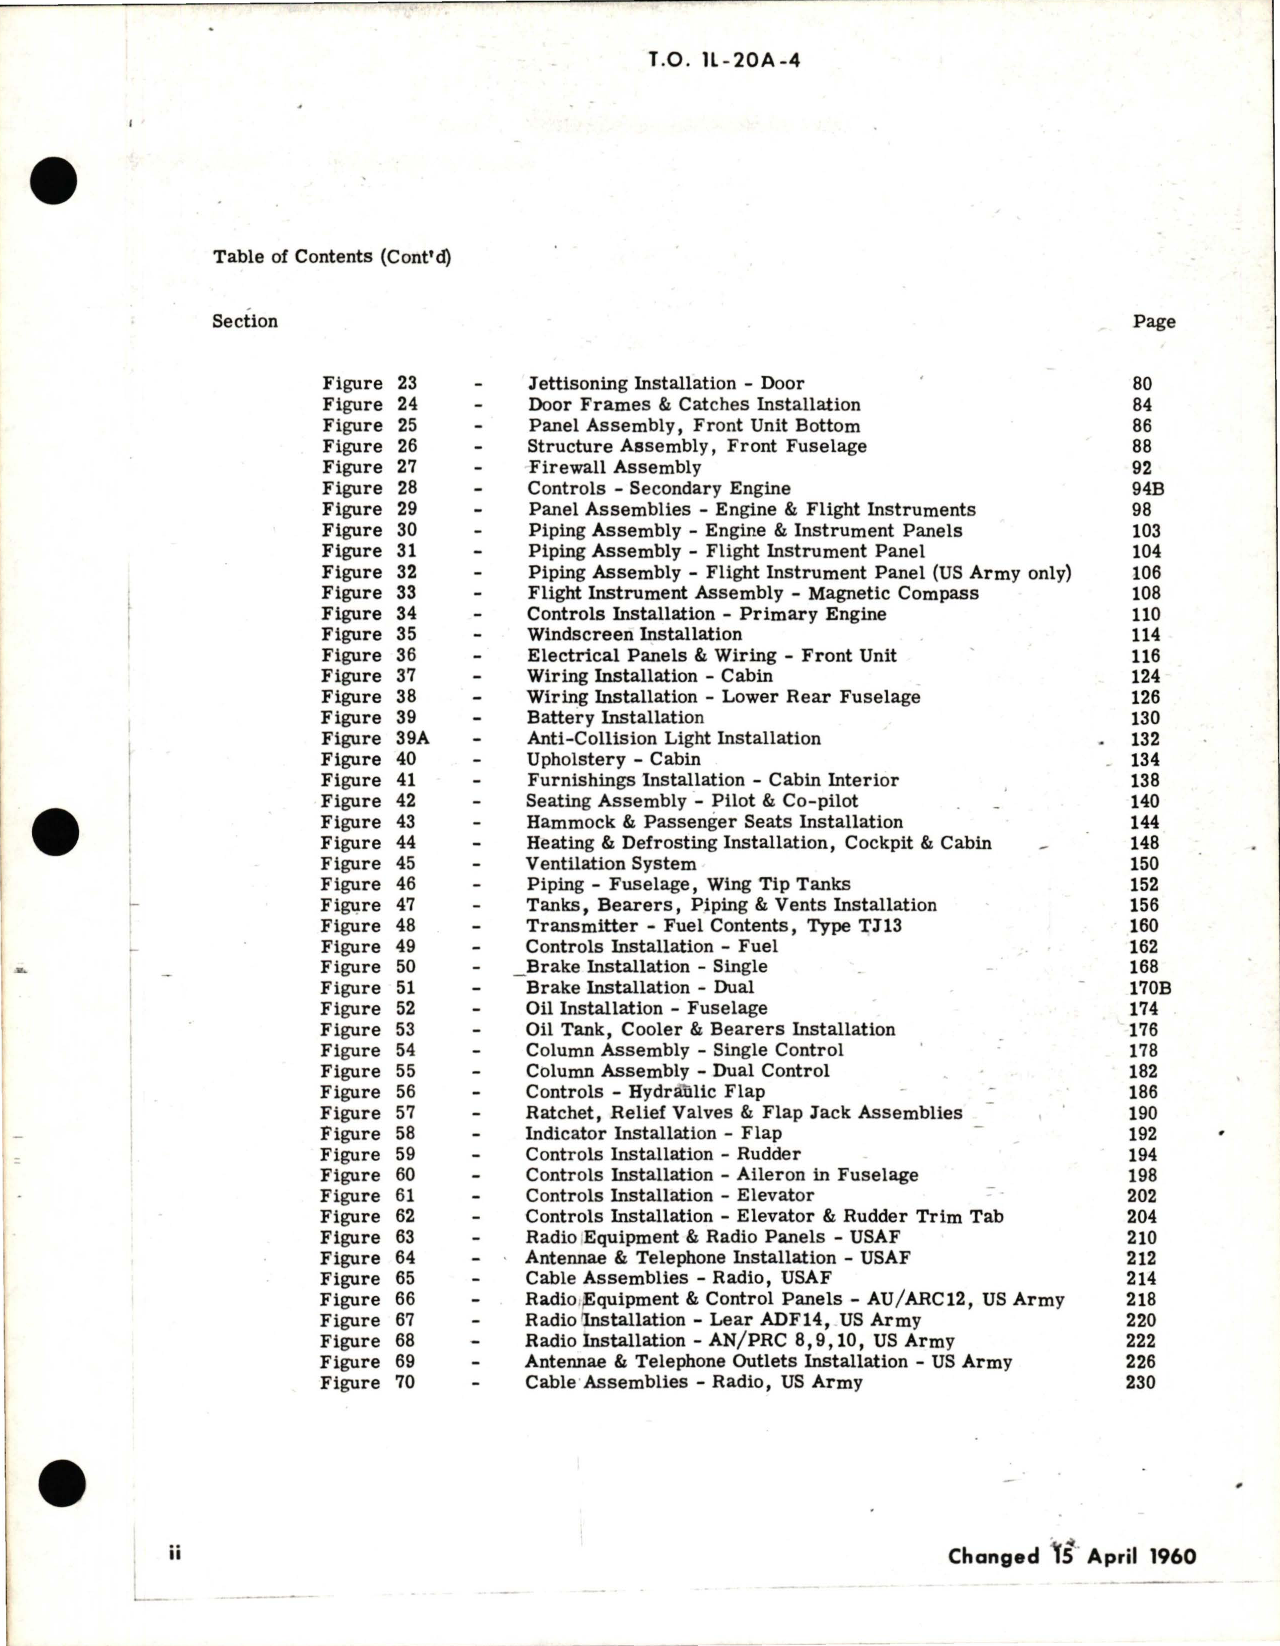 Sample page 5 from AirCorps Library document: Illustrated Parts Breakdown for L-20A Beaver